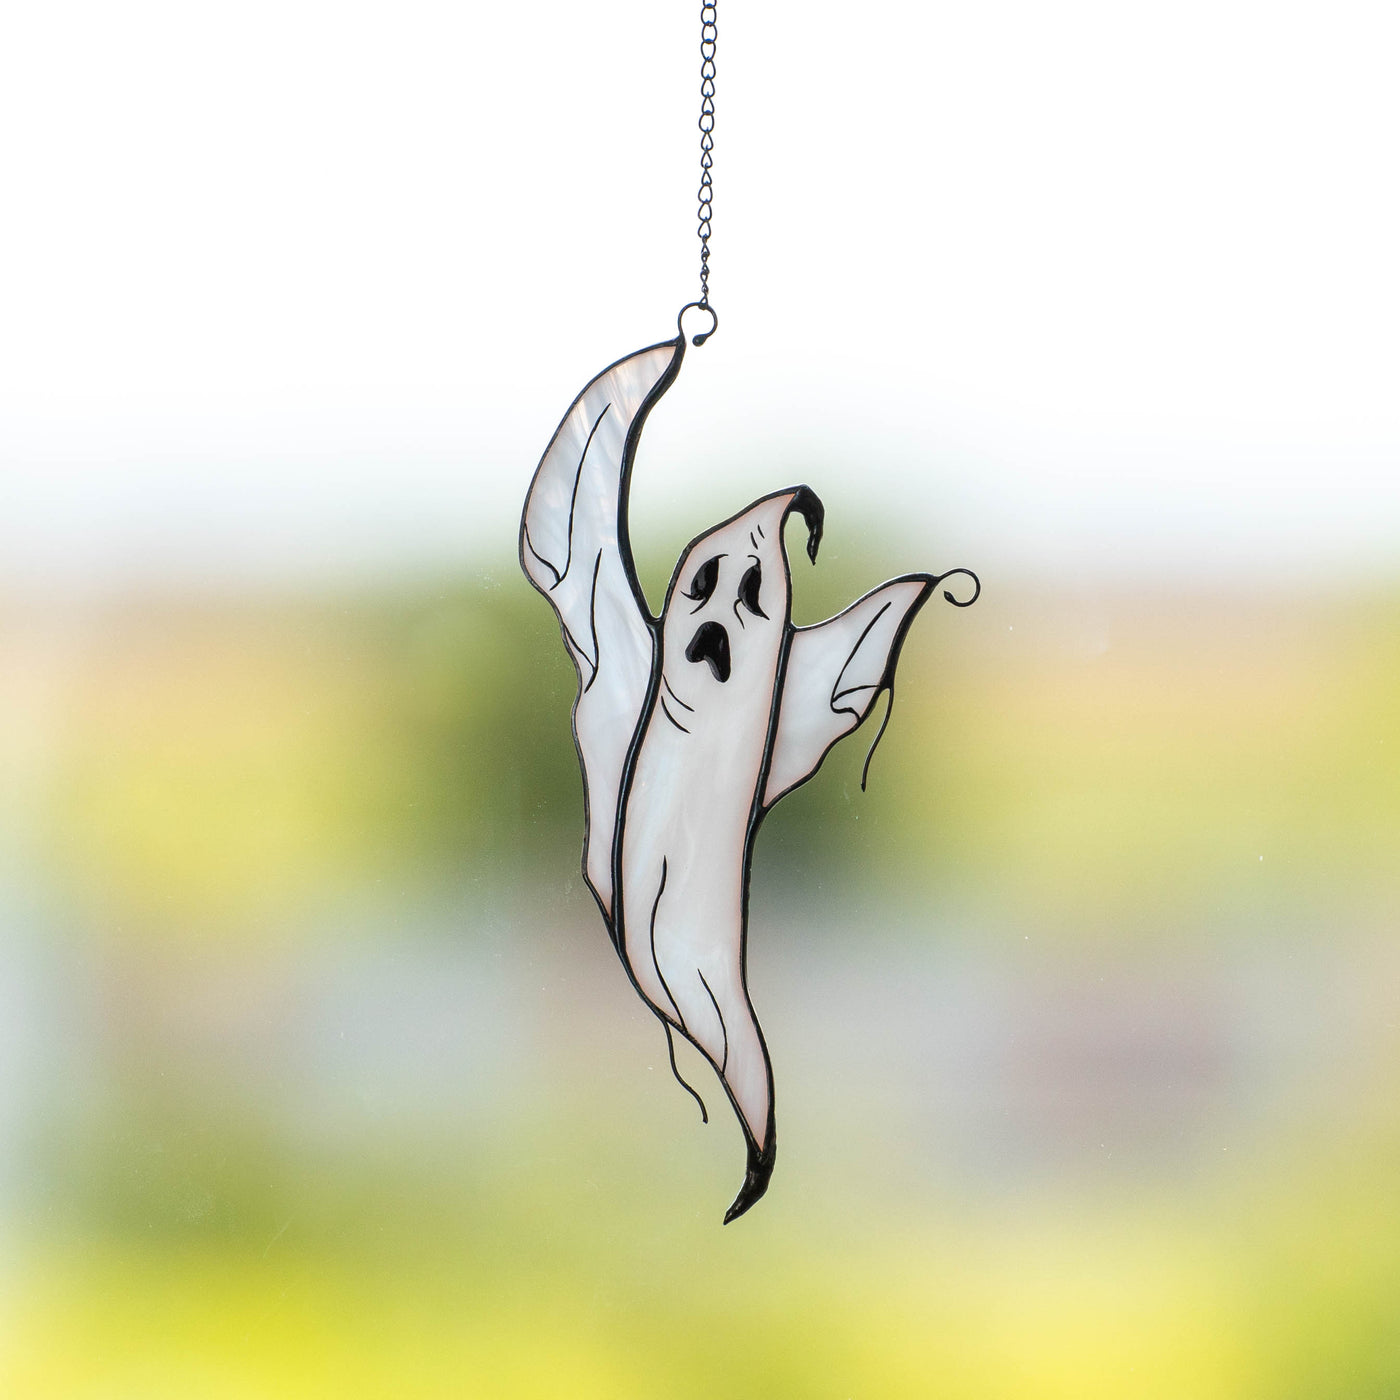 Stained glass flying ghost suncatcher 